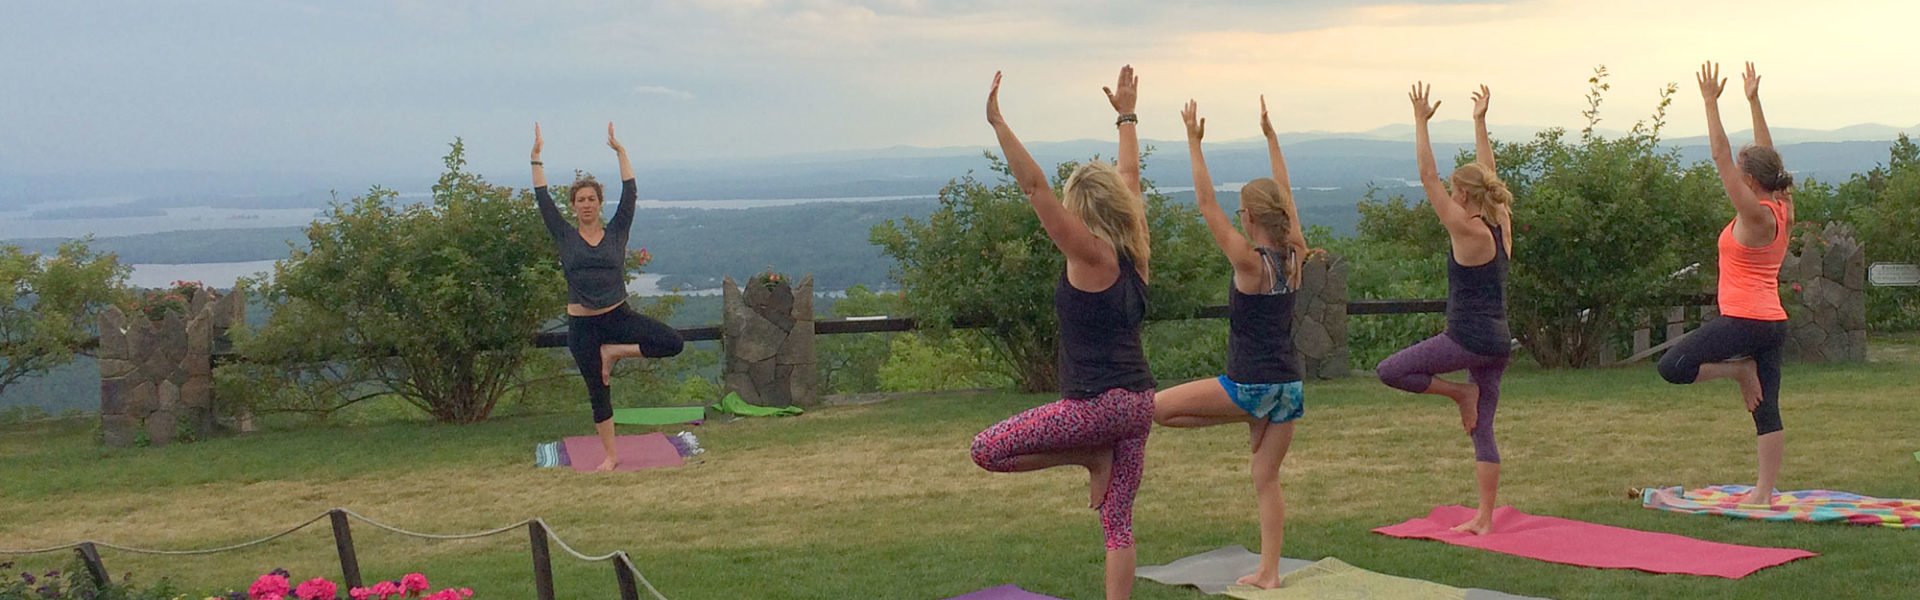 Yoga at Castle in the Clouds